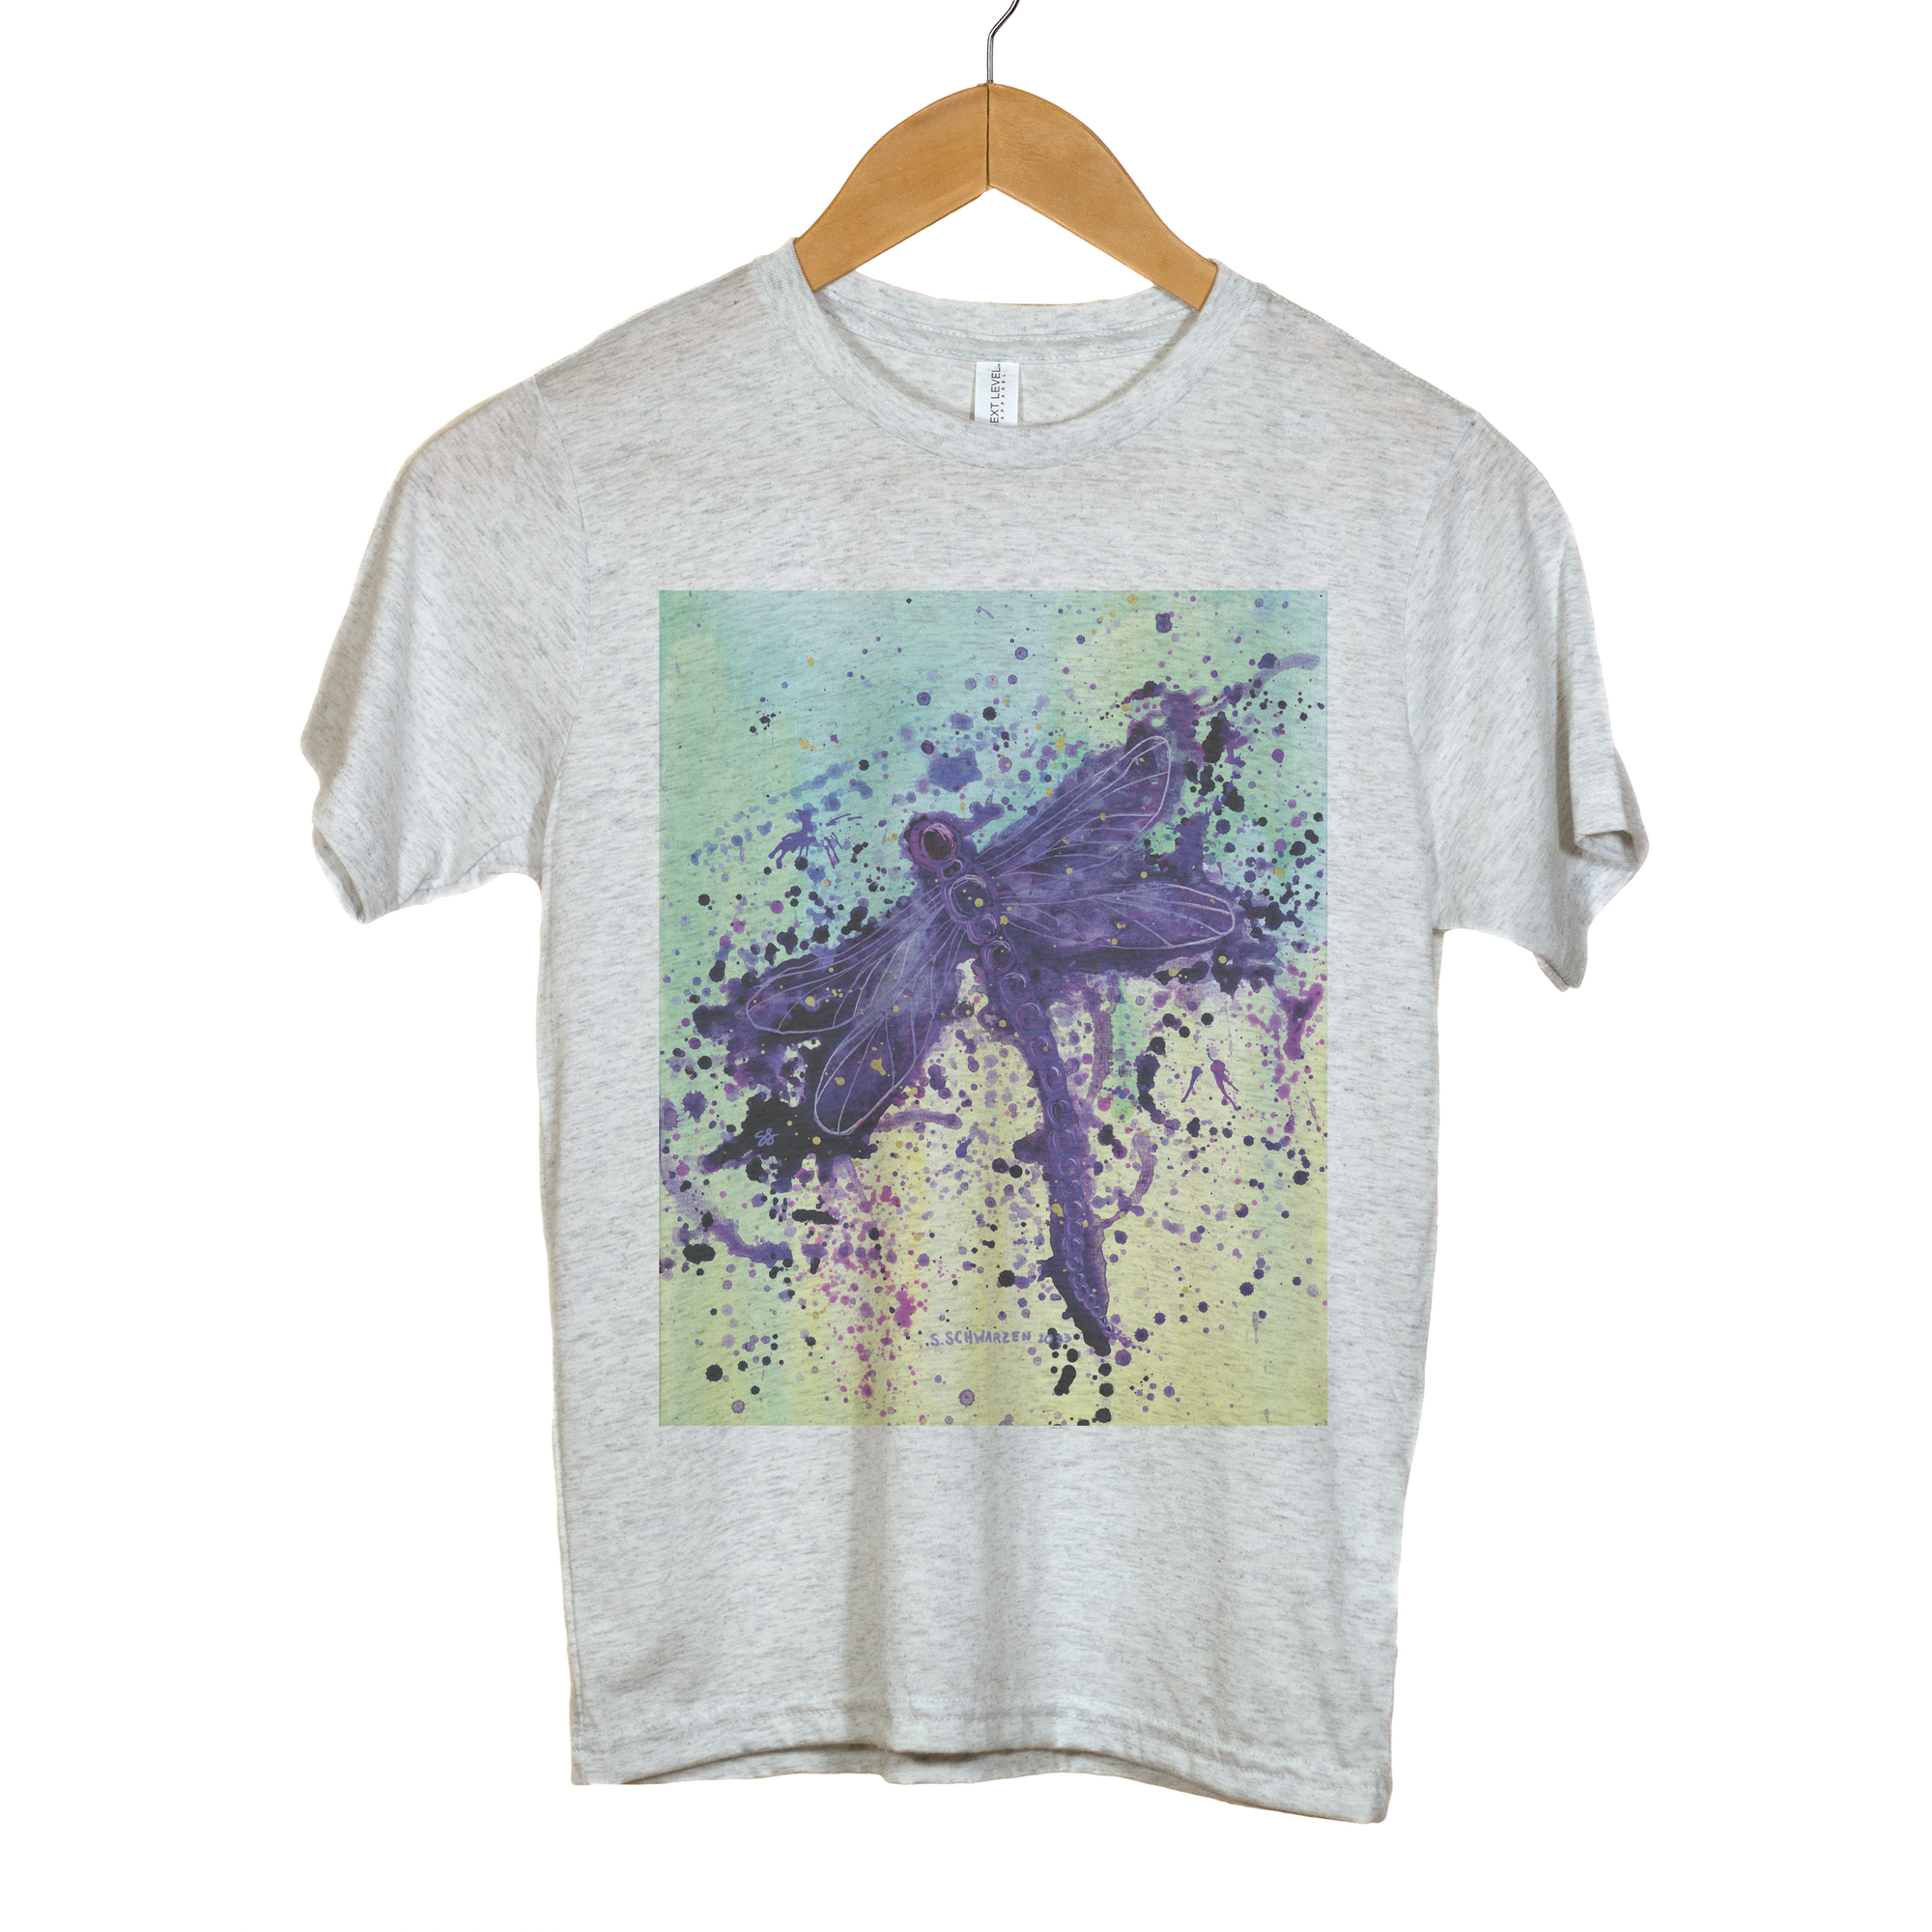 "Kait" - YOUTH Triblend Tee